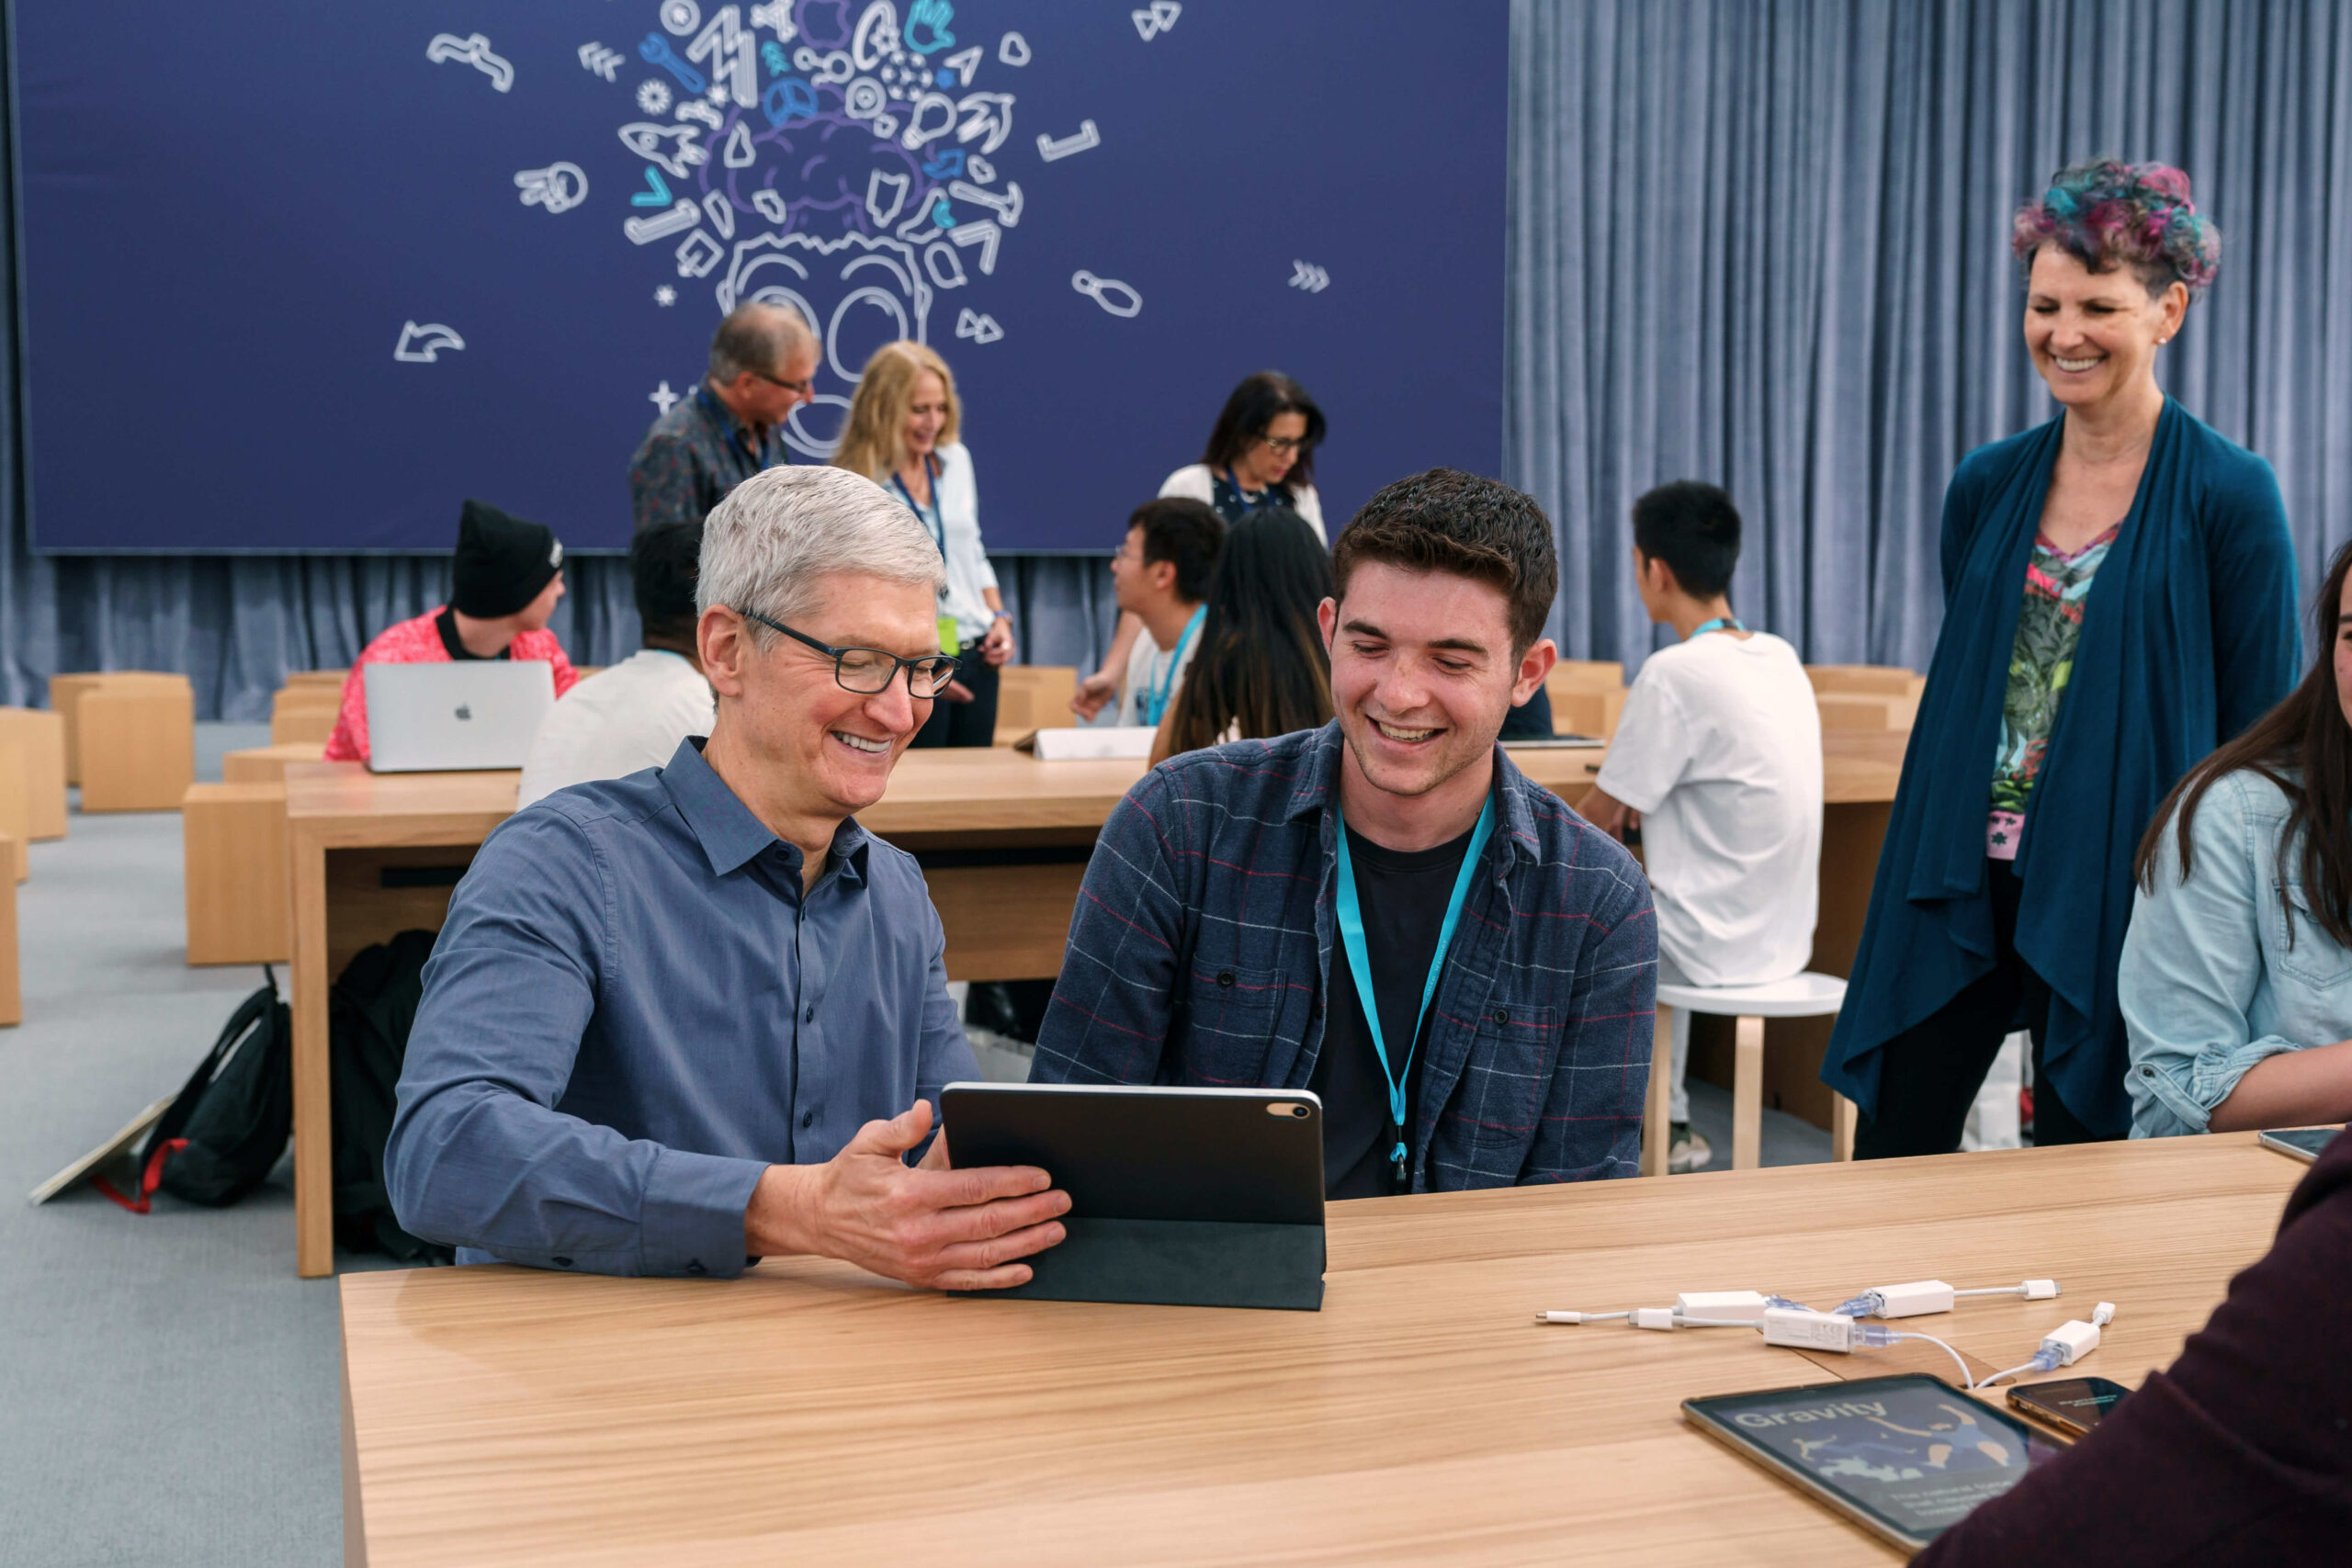 Apple Developers Conference - WWDC22 - Swift Student Challenge